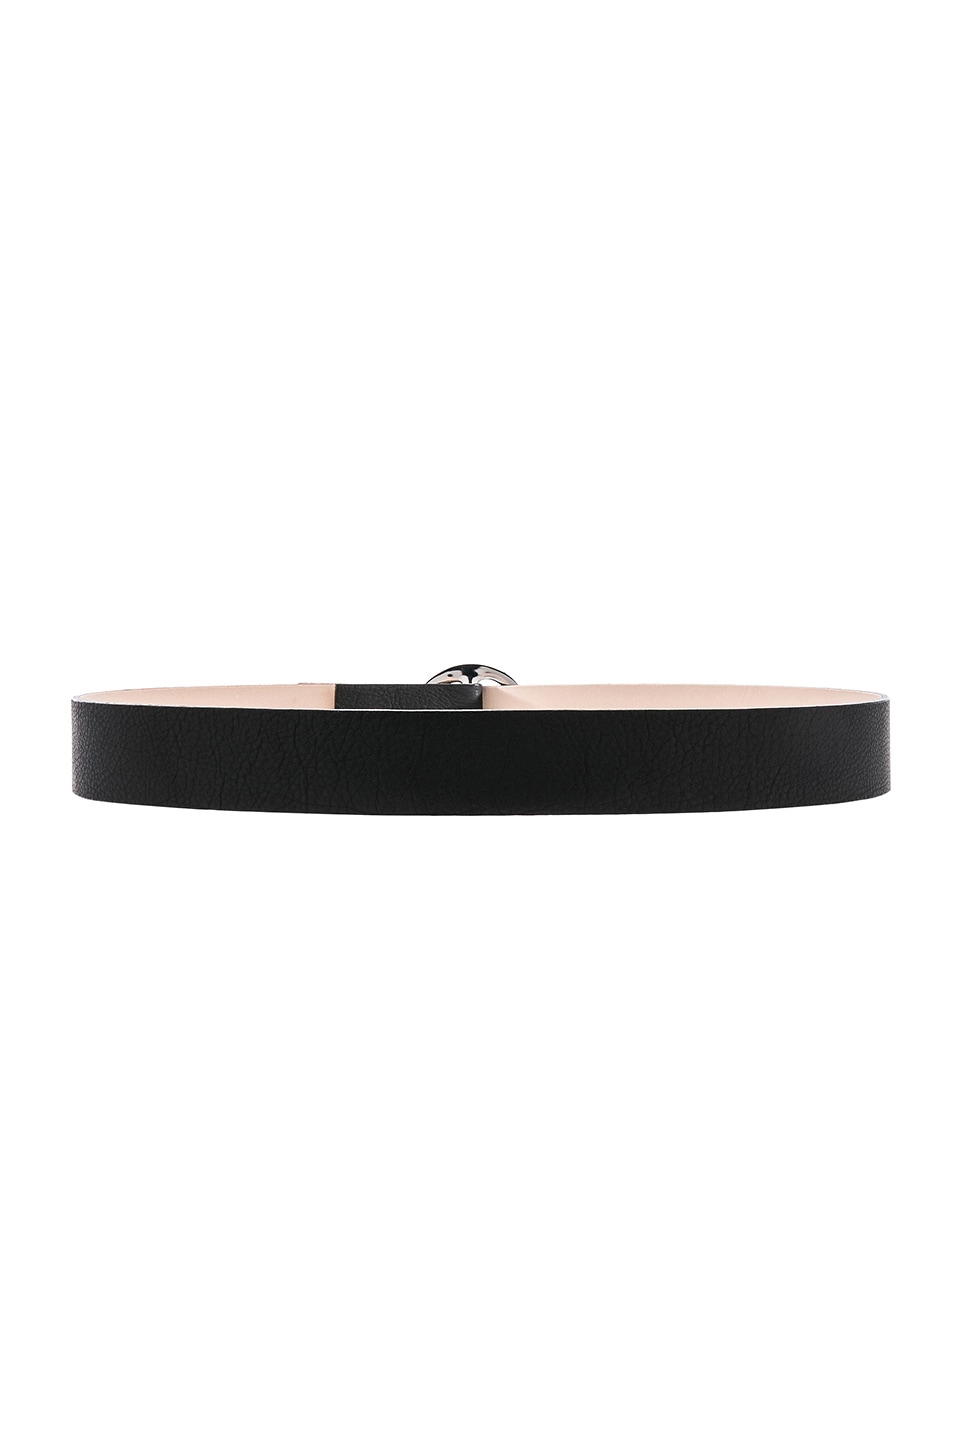 Shop B-low The Belt Baby Bell Bottom Smooth Belt In Black & Silver